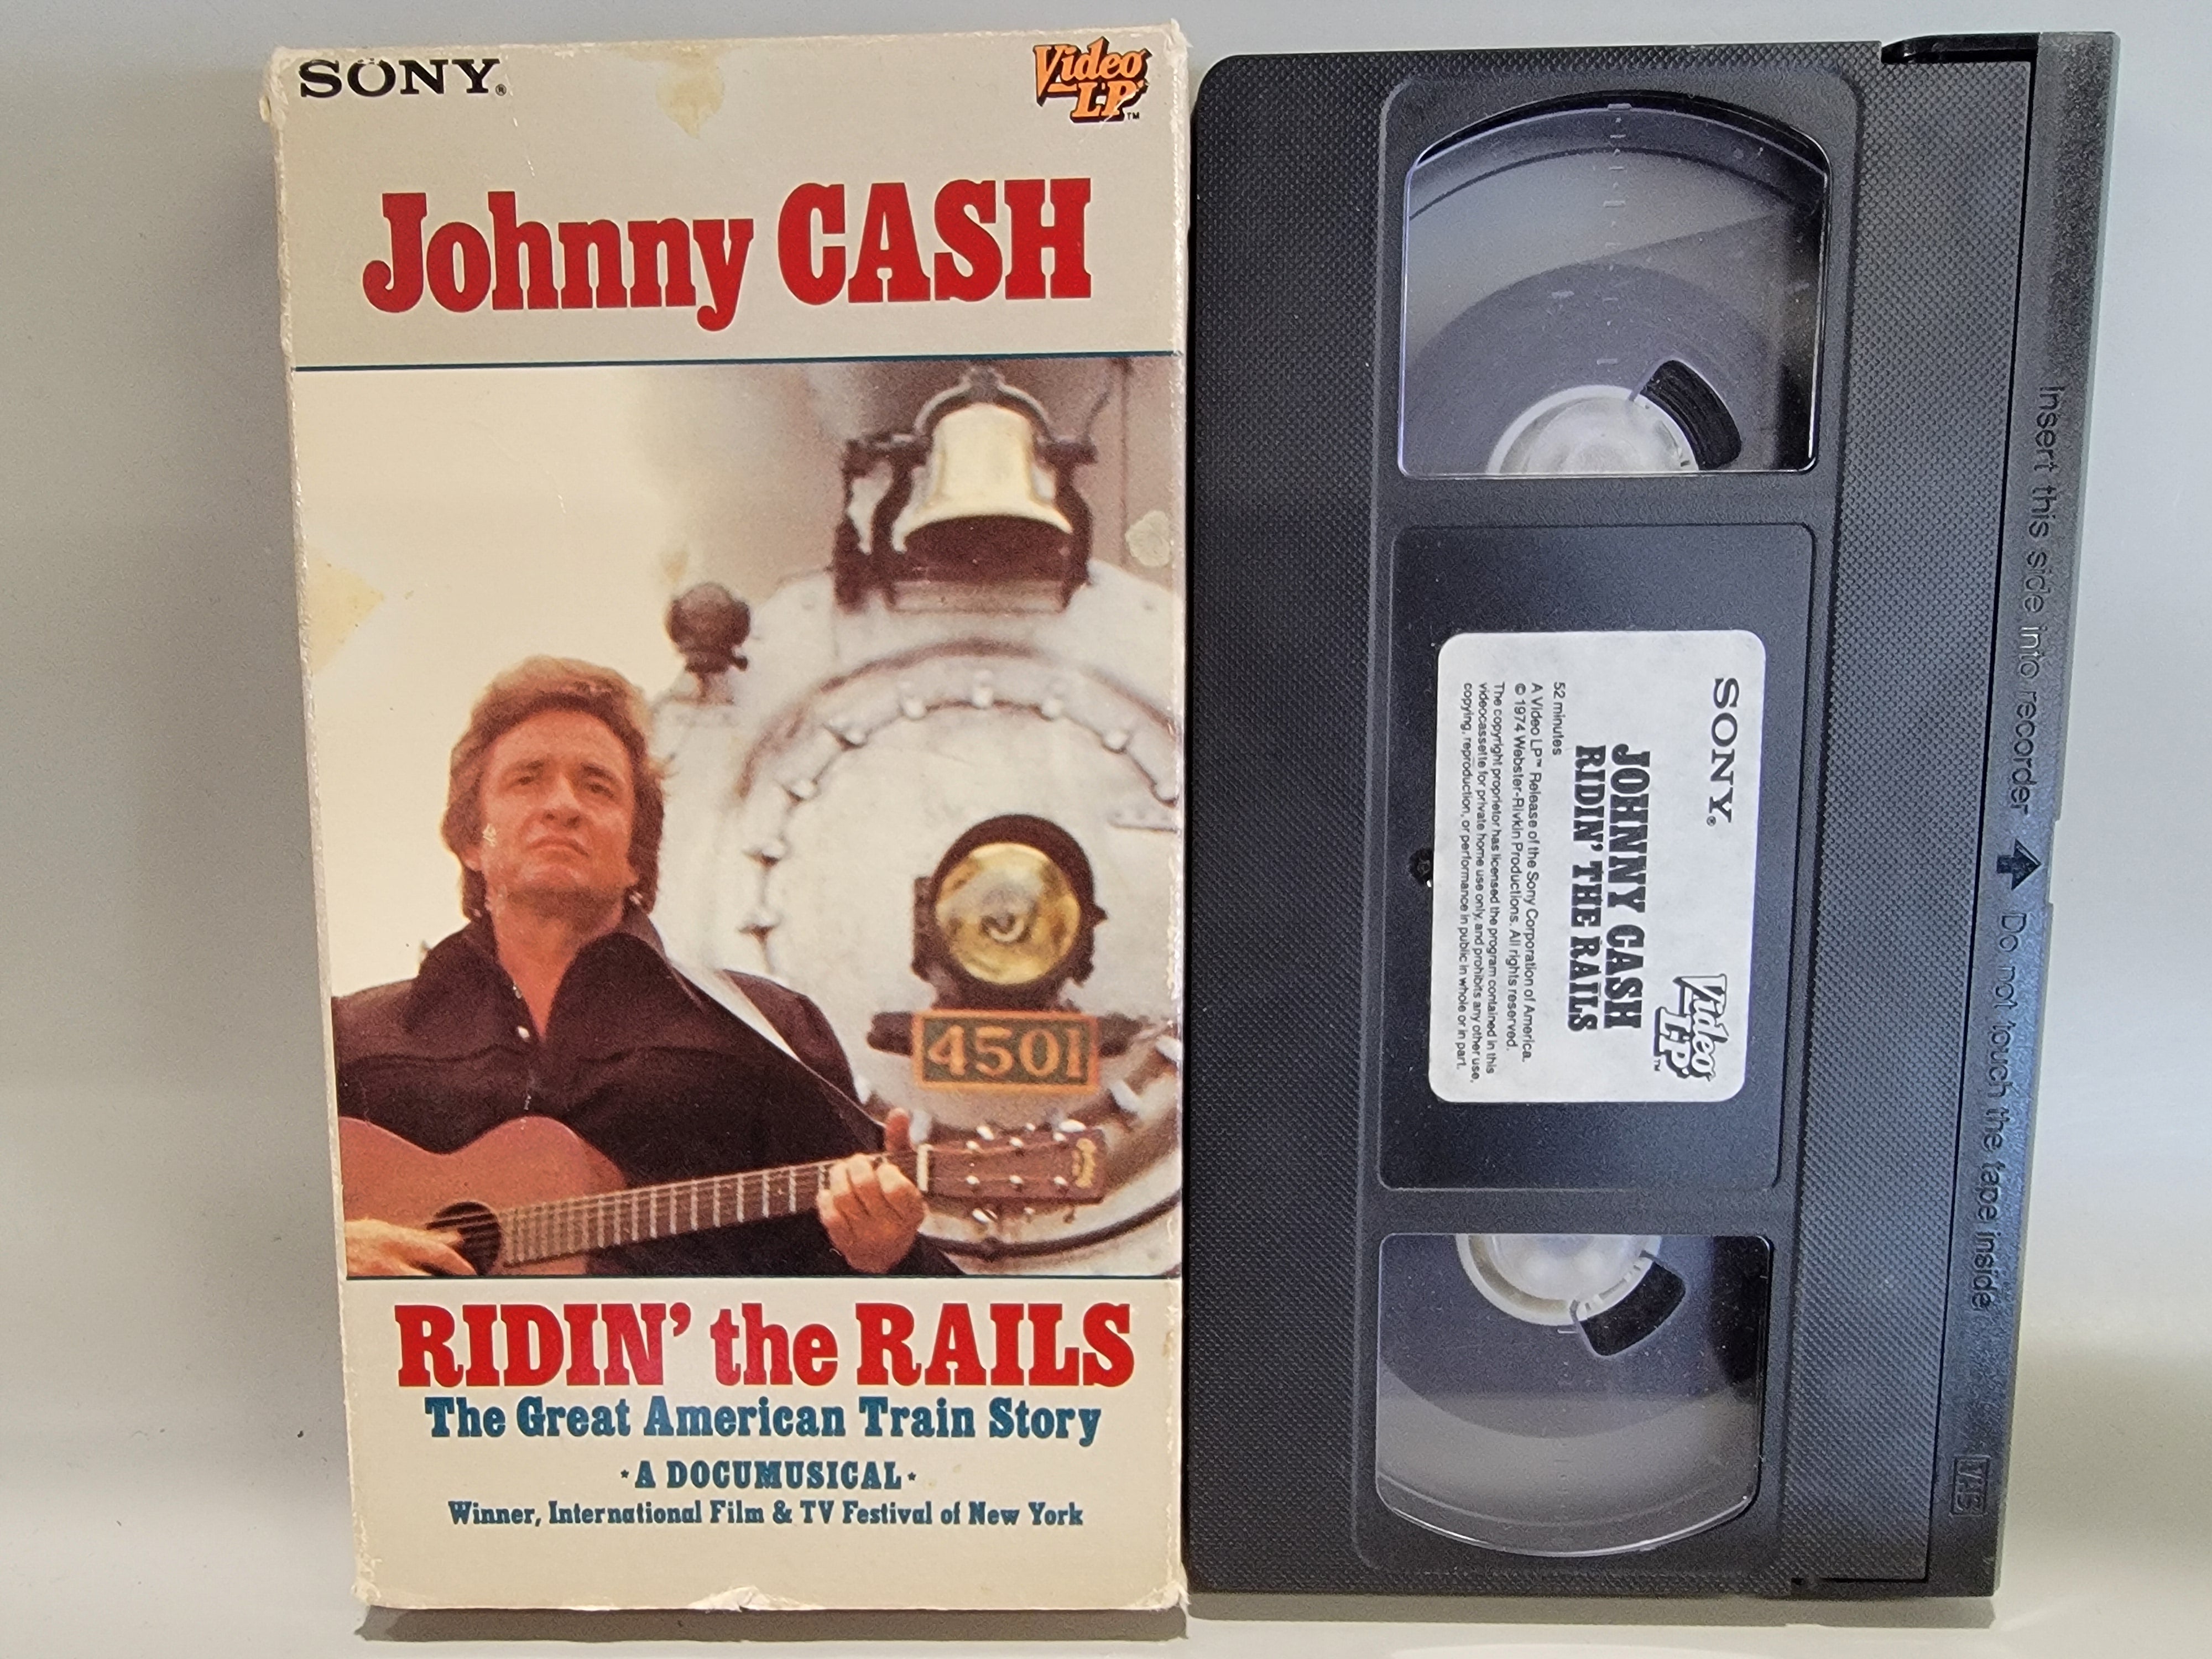 JOHNNY CASH: RIDIN' THE RAILS VHS [USED]